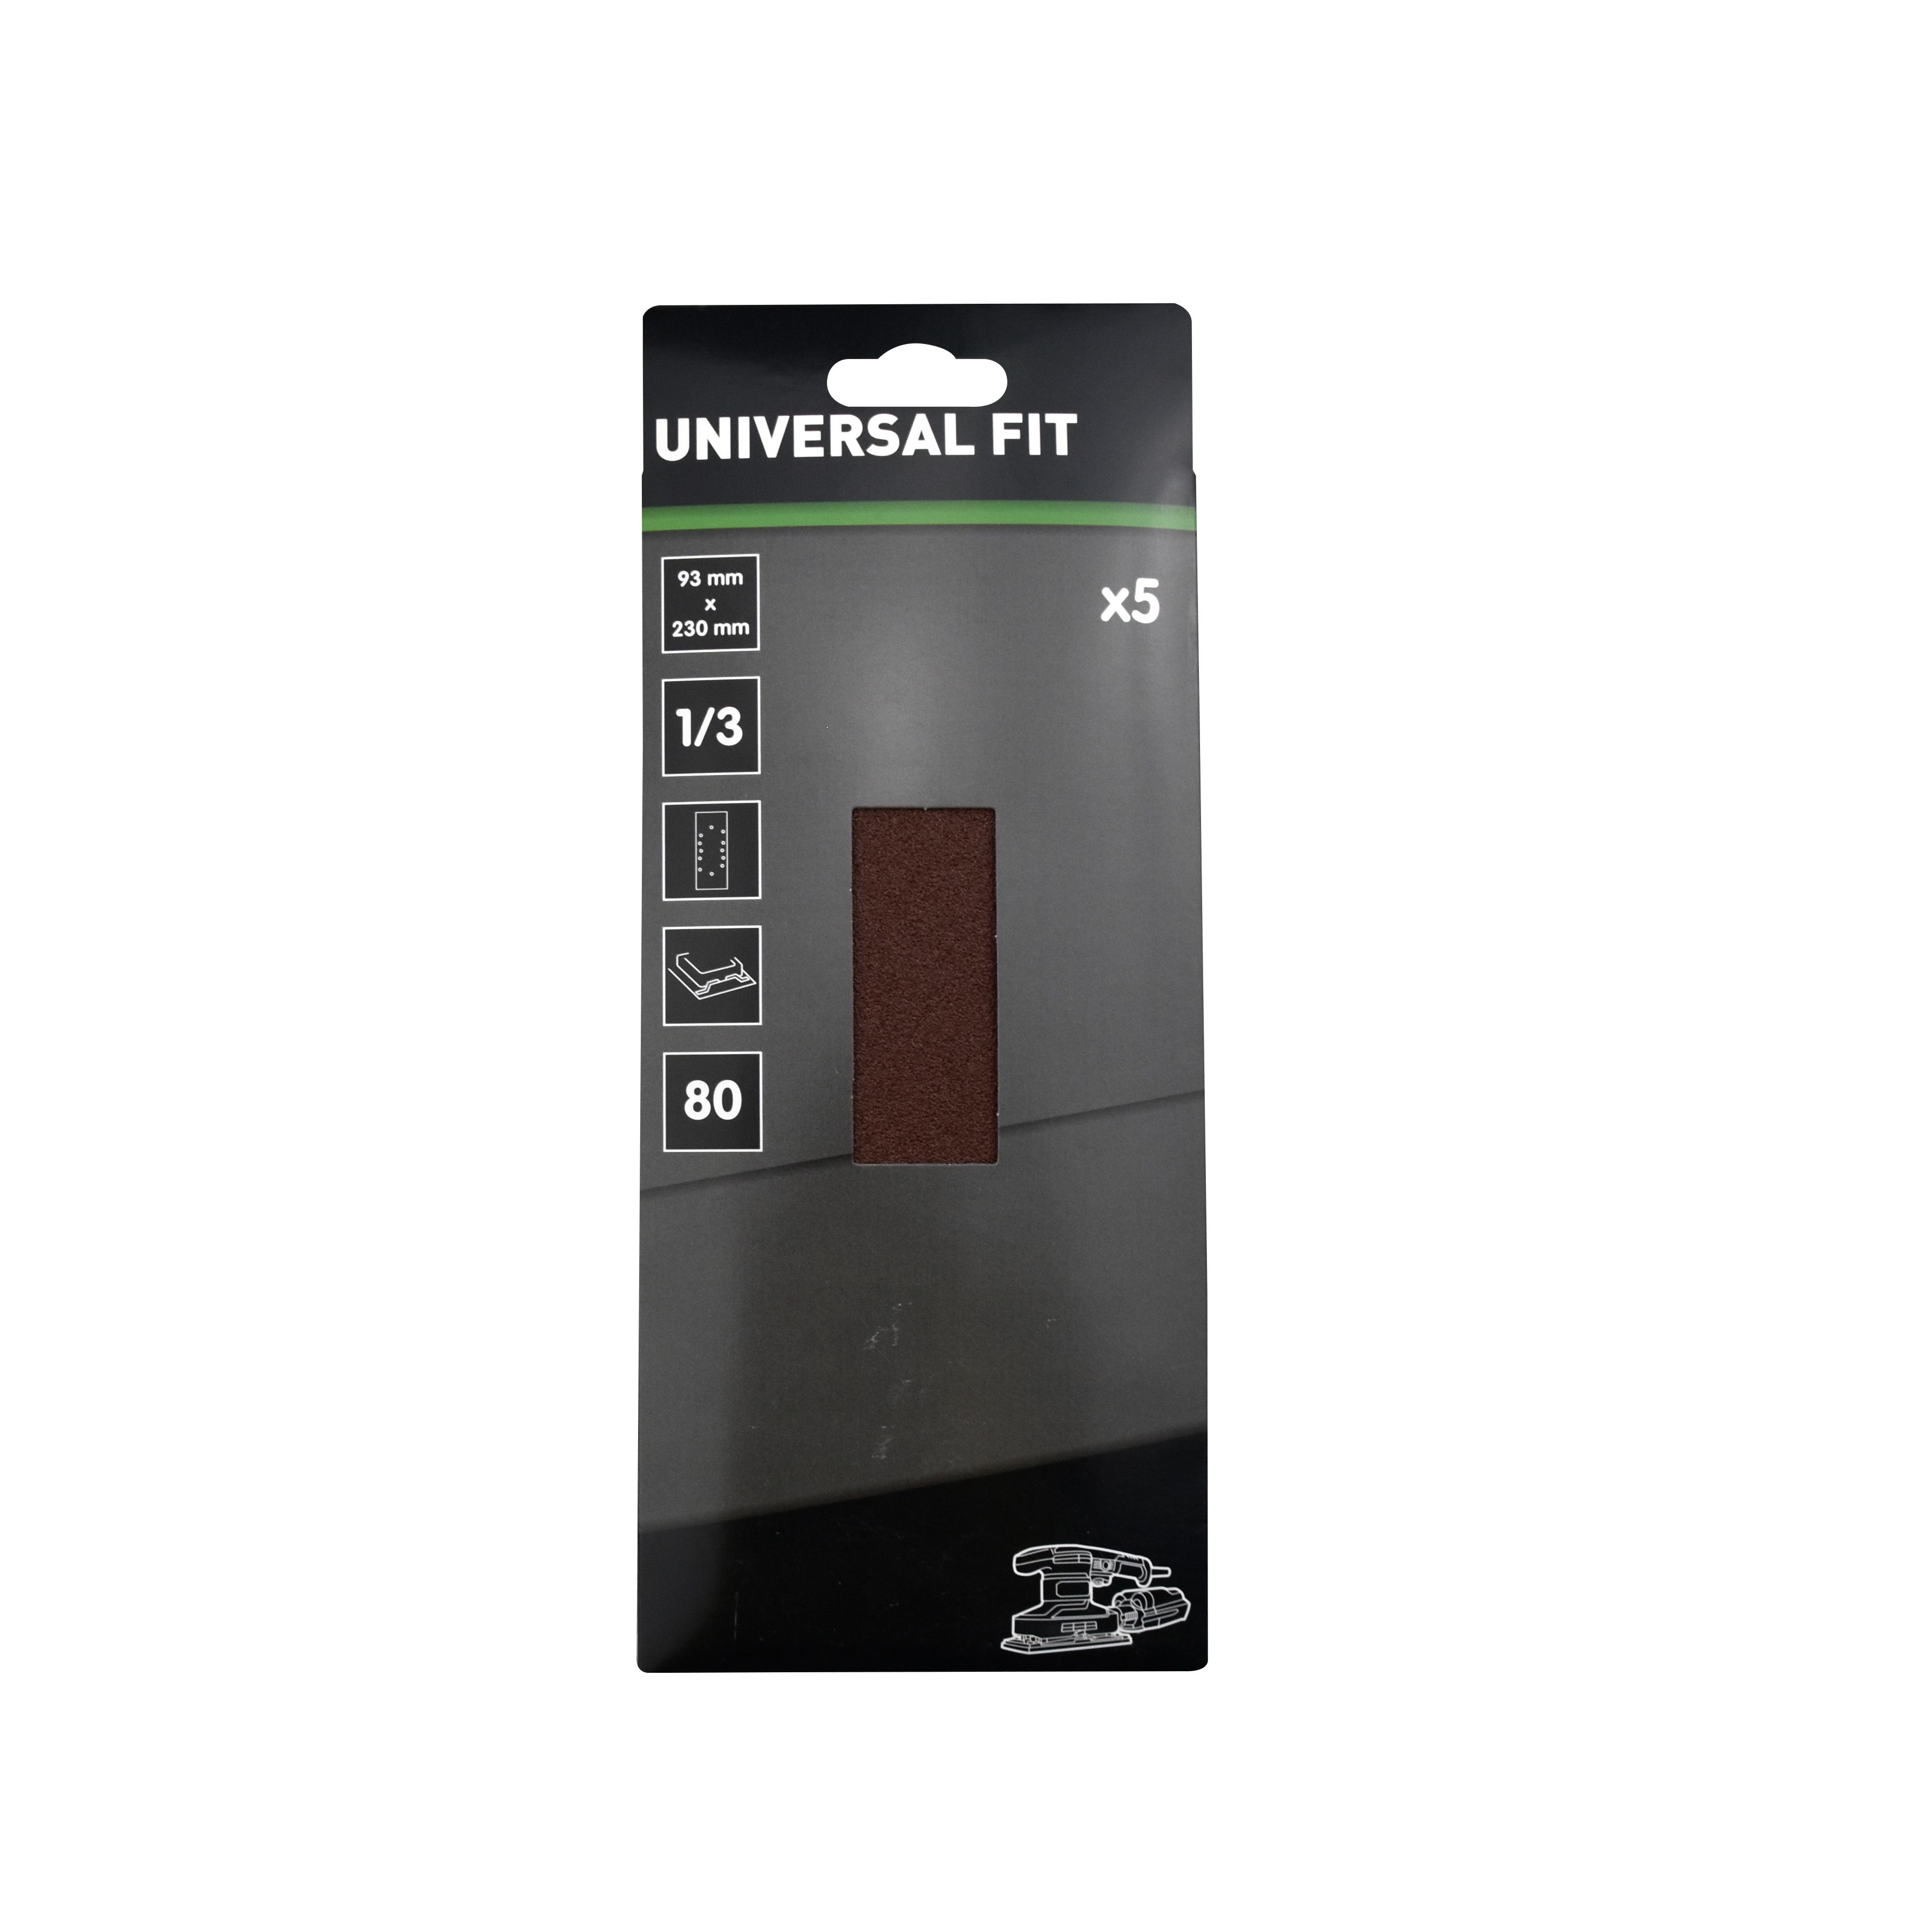 Universal Fit 80 grit Red 1/3 sanding sheet (L)230mm (W)93mm, Pack of 5